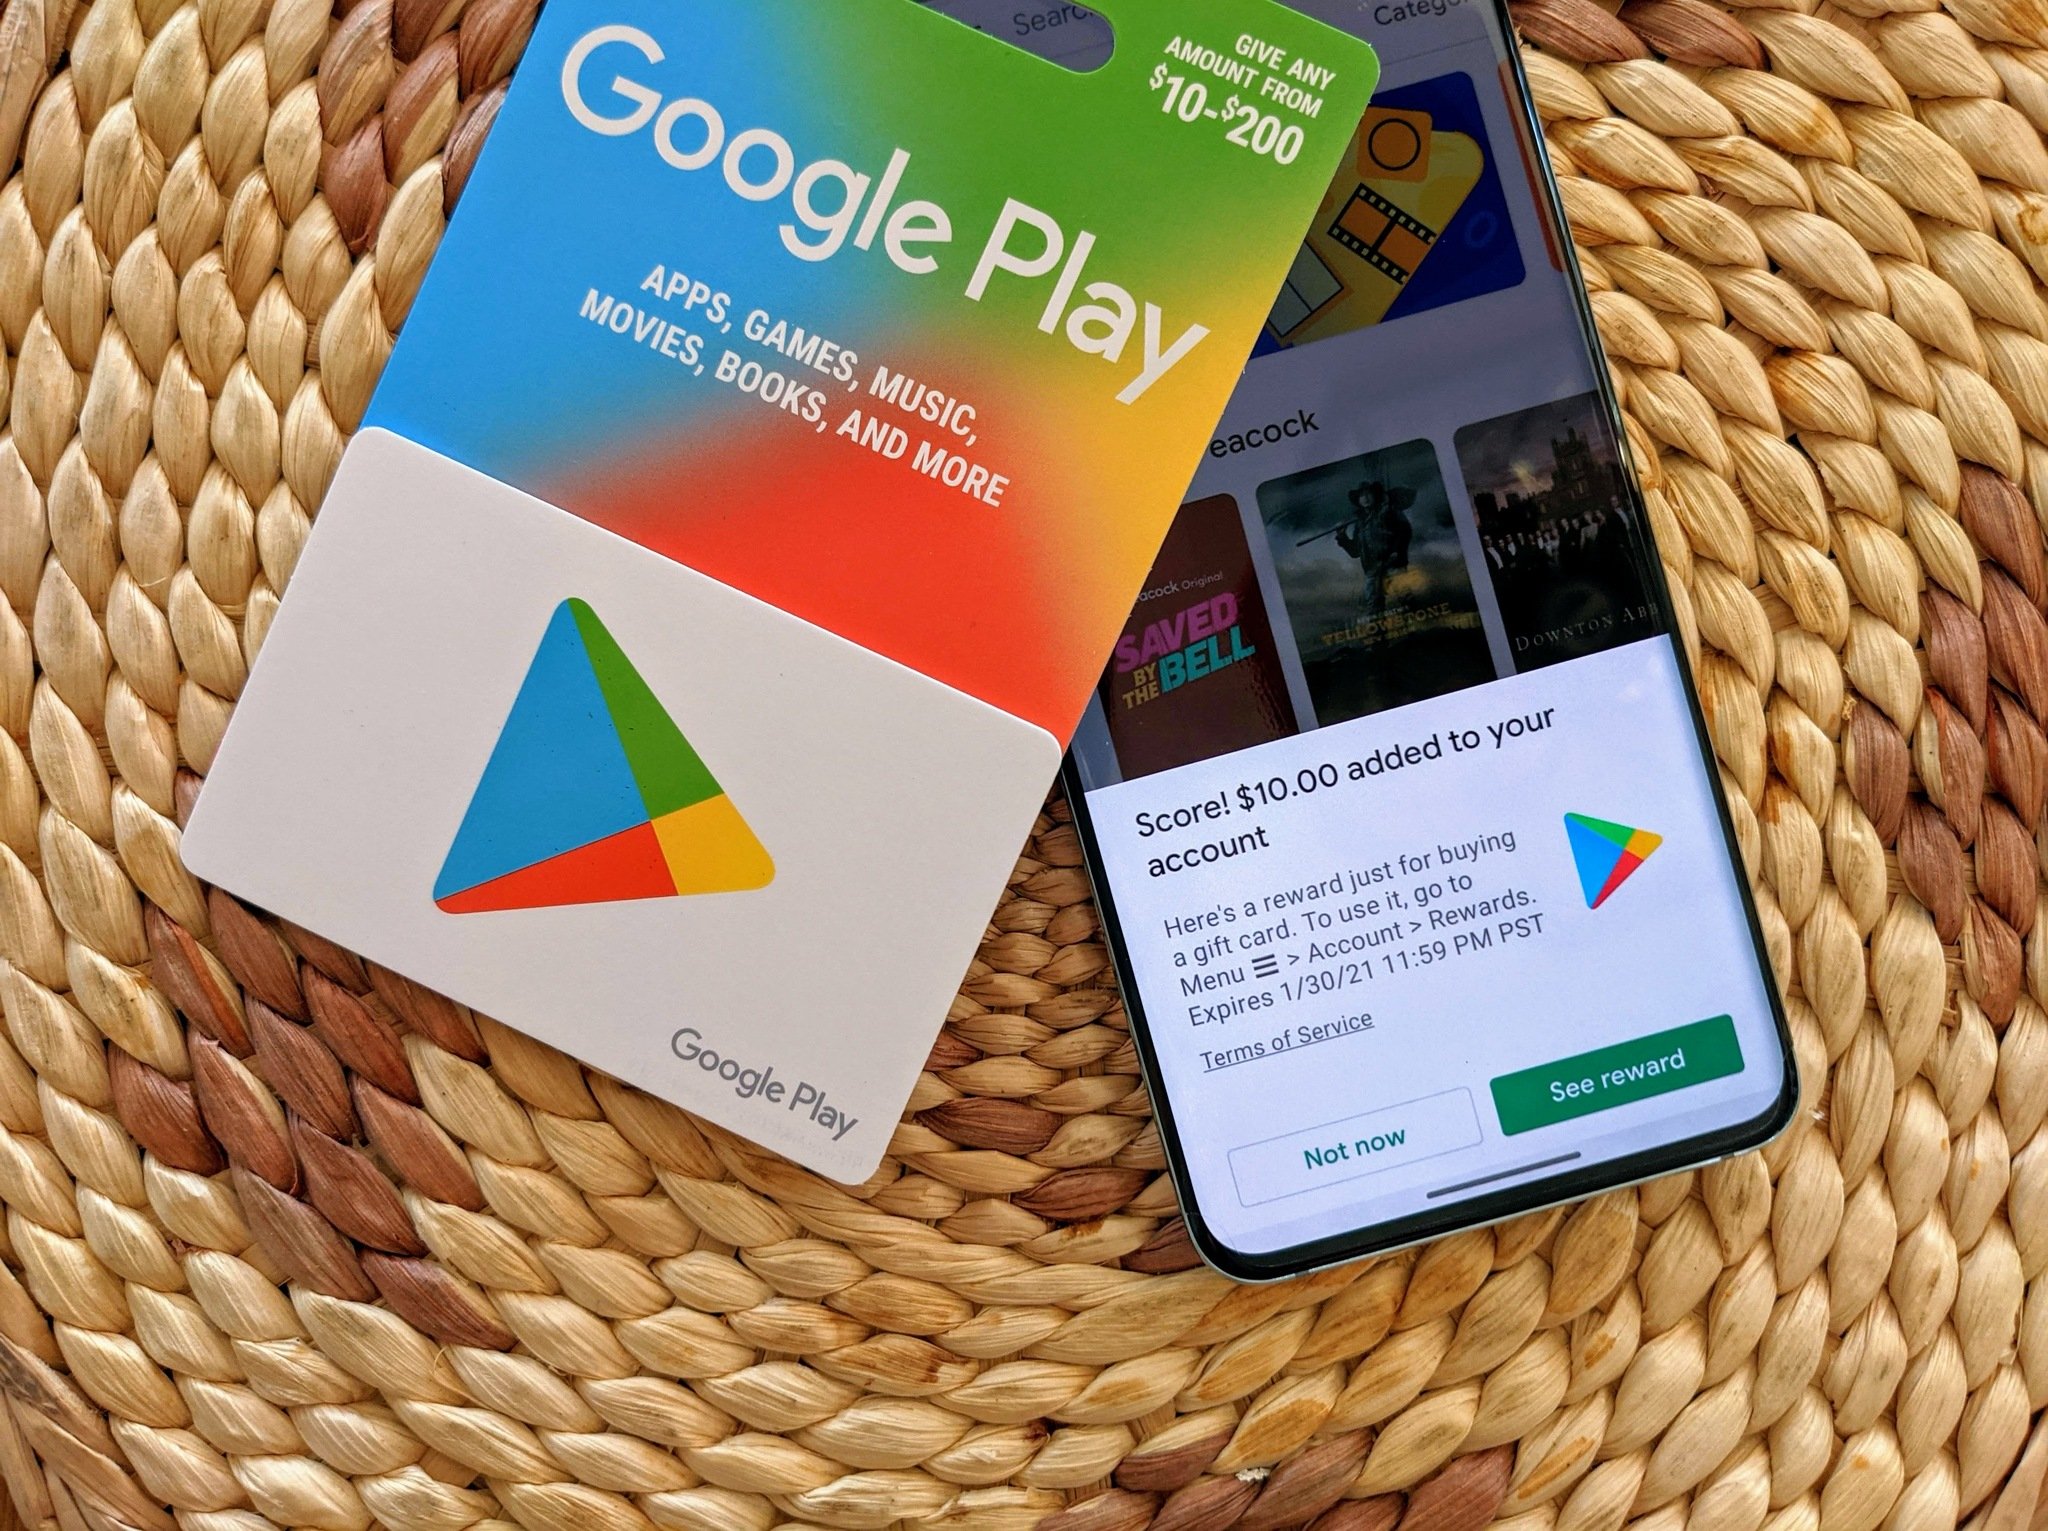 What Can You Do With Google Play Gift Card?